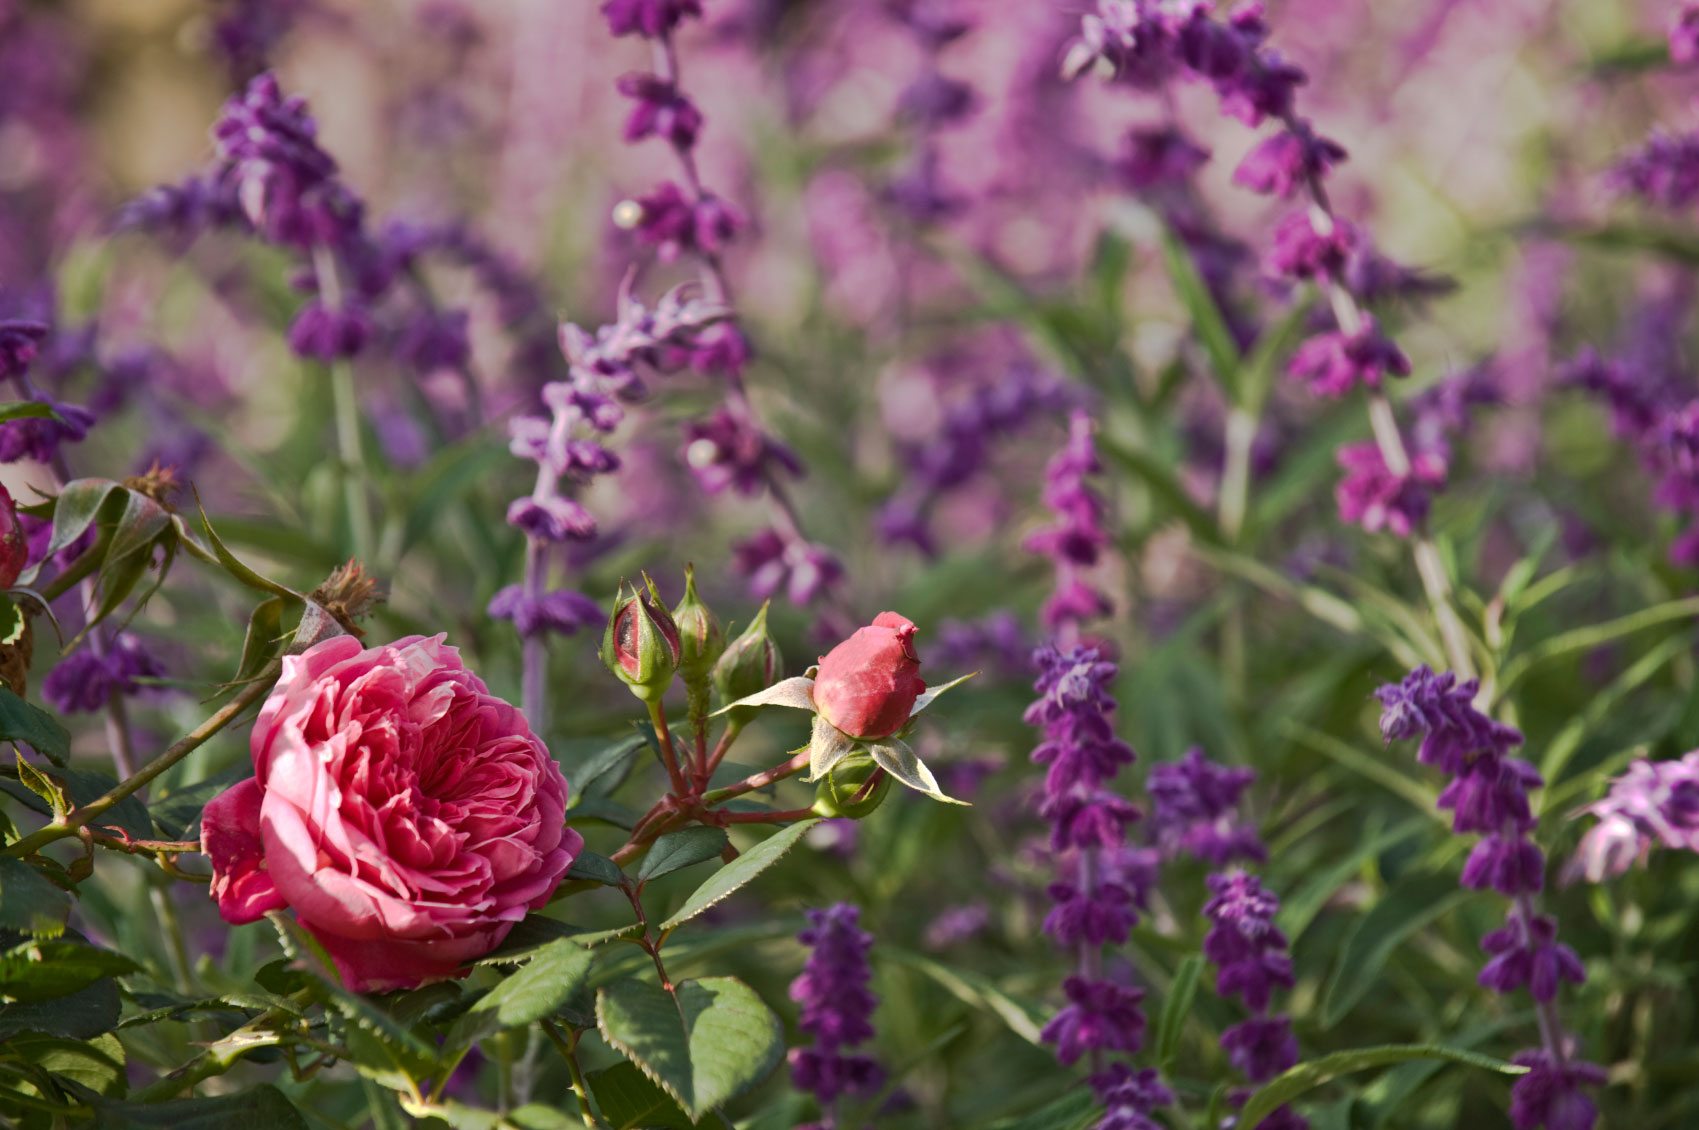 5 Tips for Growing Lavender with Roses